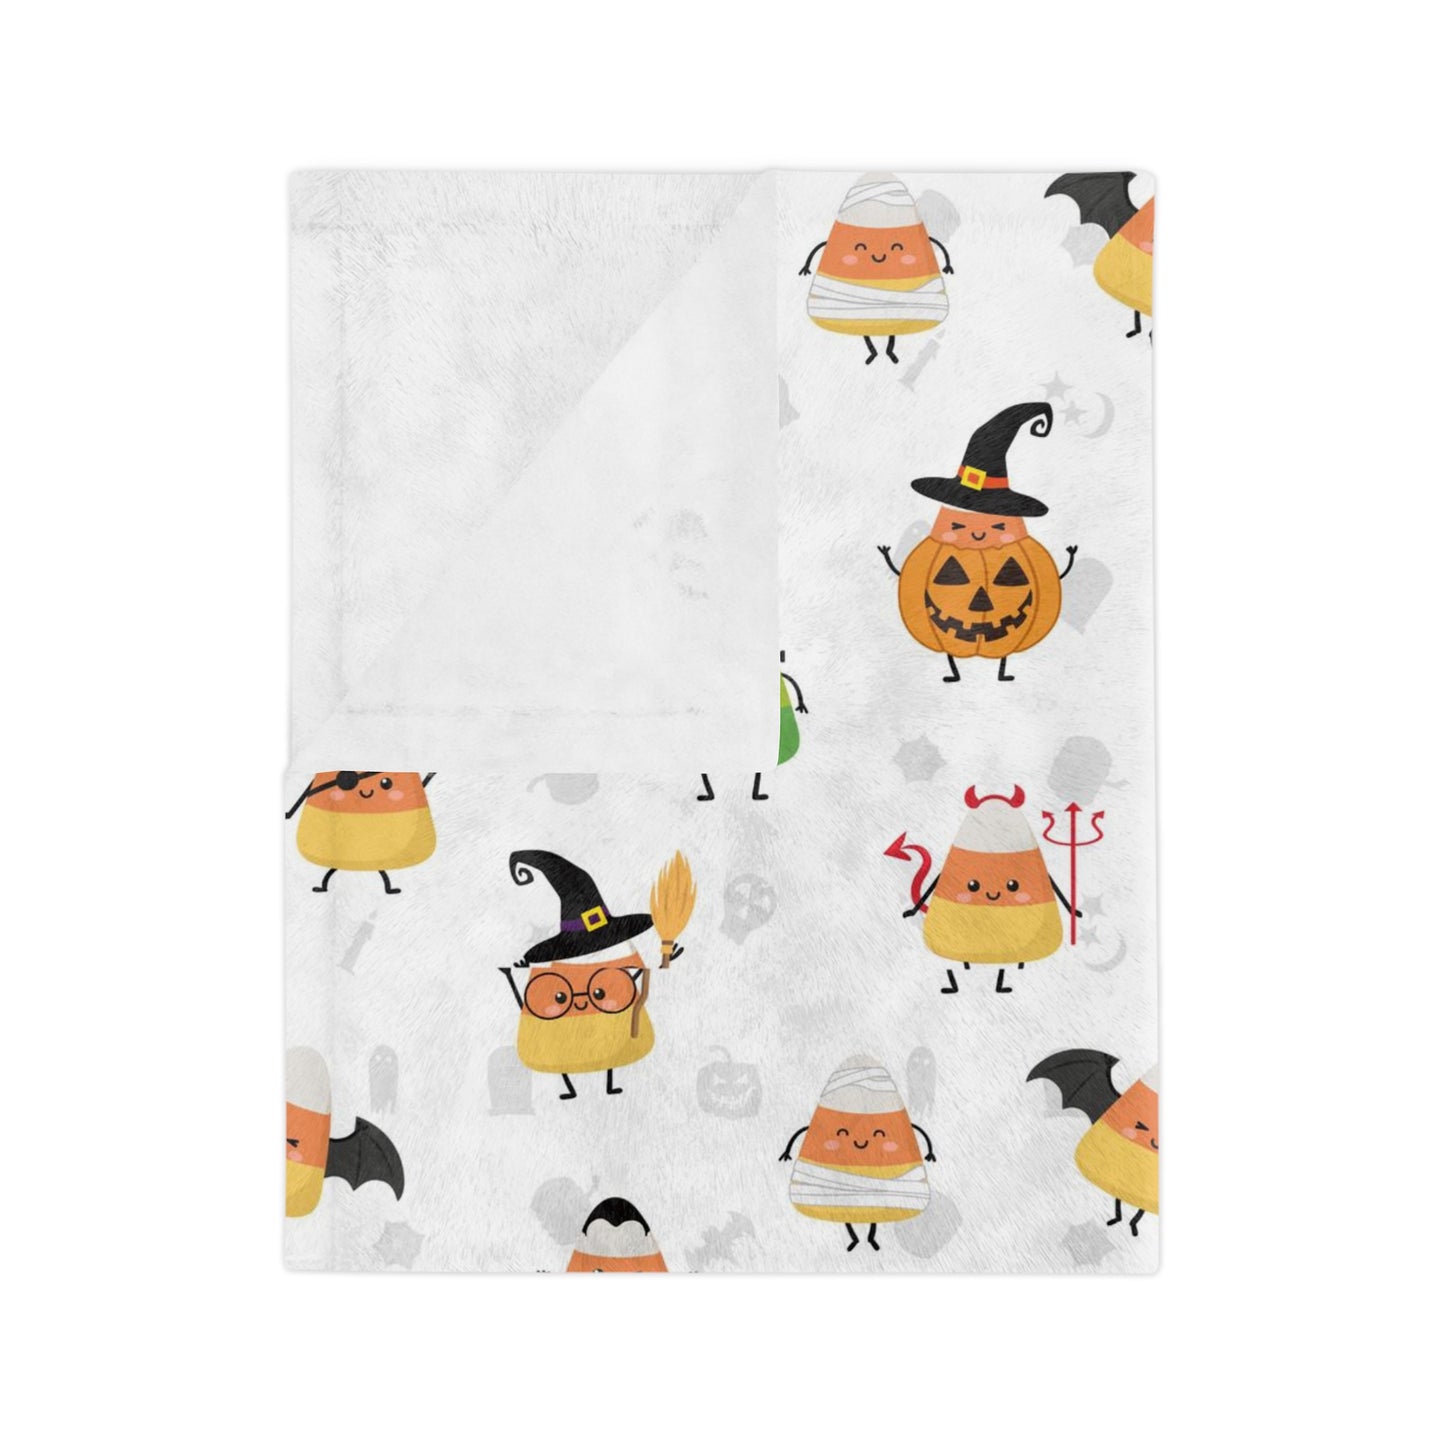 Halloween Blanket with candy corn for spooky season. Candy corns with Halloween costumes for Halloween lovers